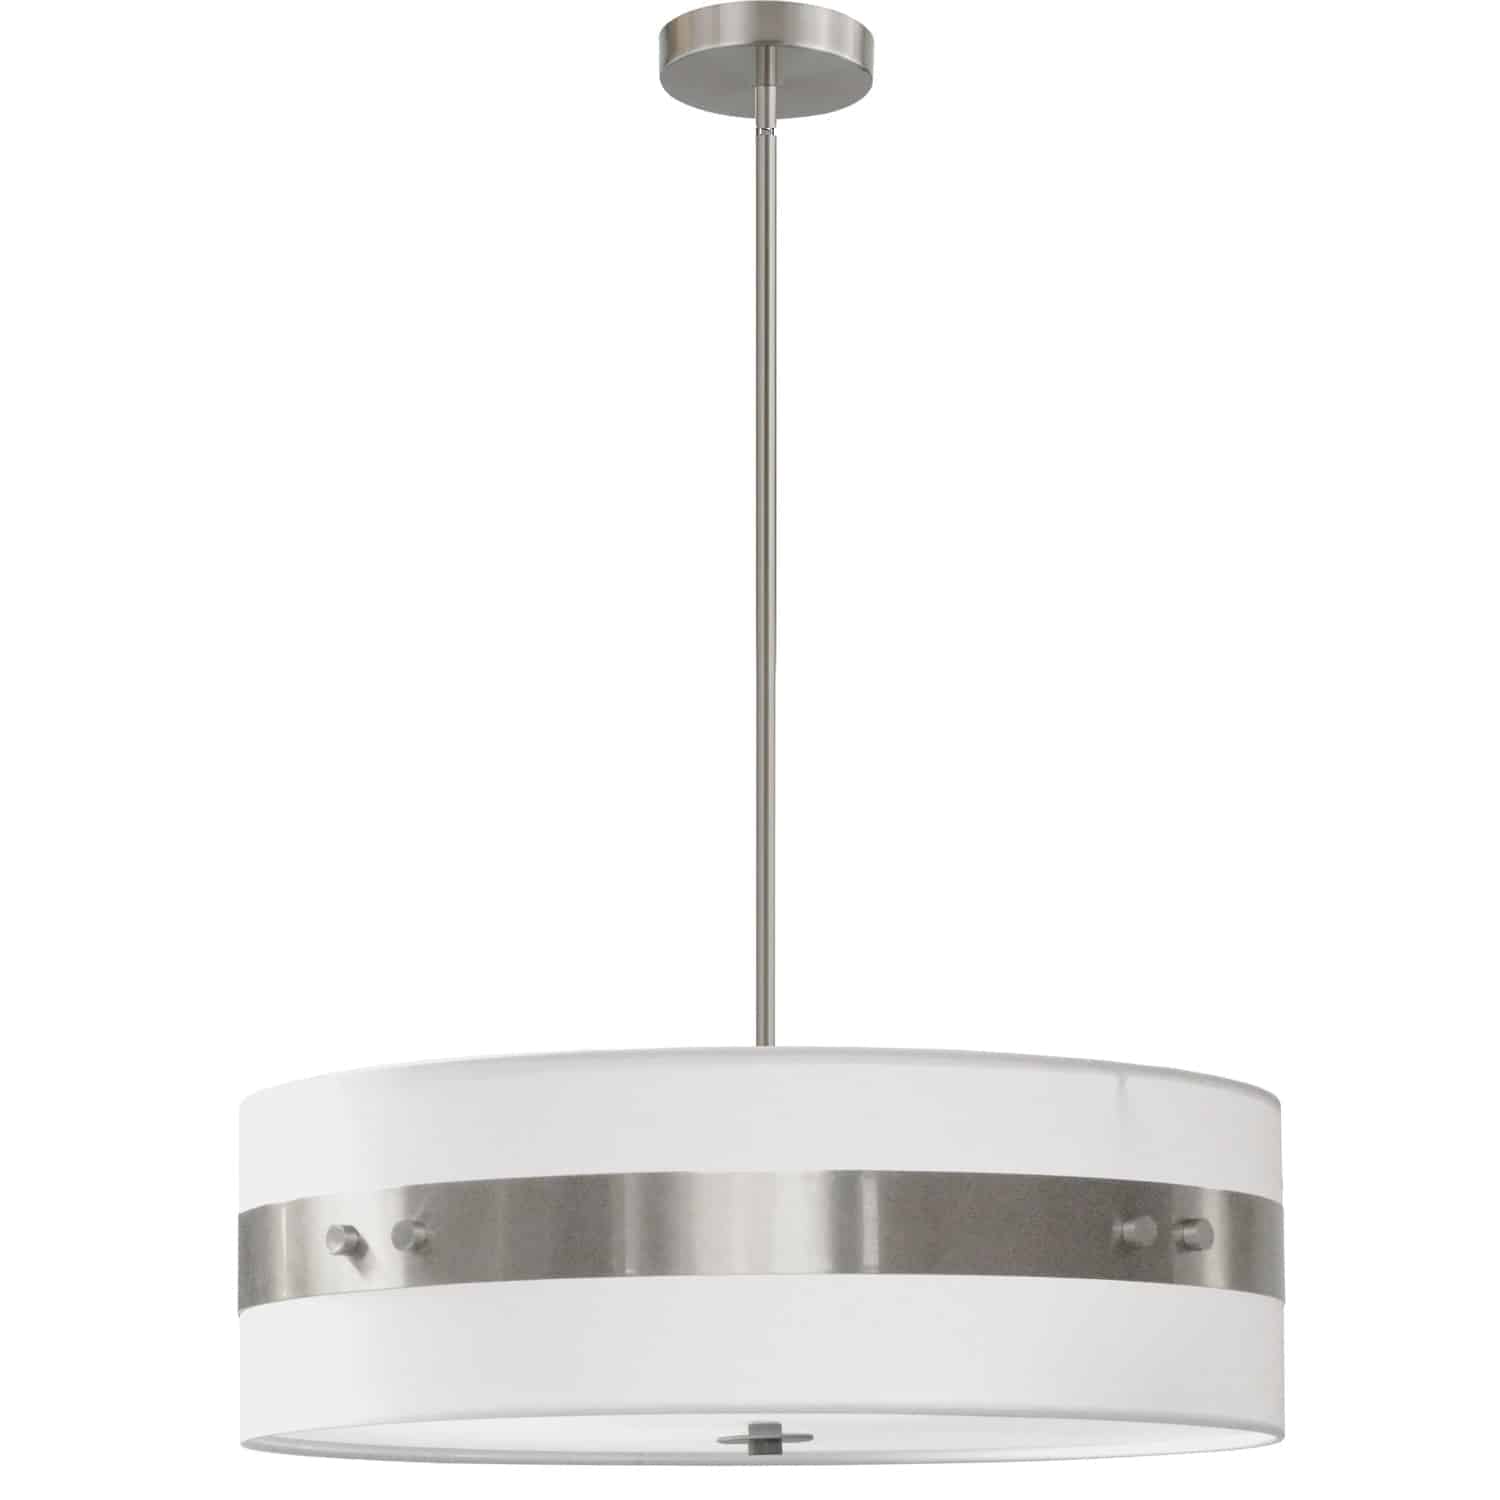 The allure of Willshire lighting is bold, and based in an eclectic sense of fashion that blends modern and traditional elements. It's a look based on contrasts, and the perennial appeal of a classic drum shade. The metal frame matches a wide band that decorates the middle of a drum shade. The fabric shade features a slim profile that will enhance any size room. With its ageless sense of style, Willshire lighting adds a noticeably elegant touch of luxury to living rooms and kitchens, and sets a chic tone in your foyer.